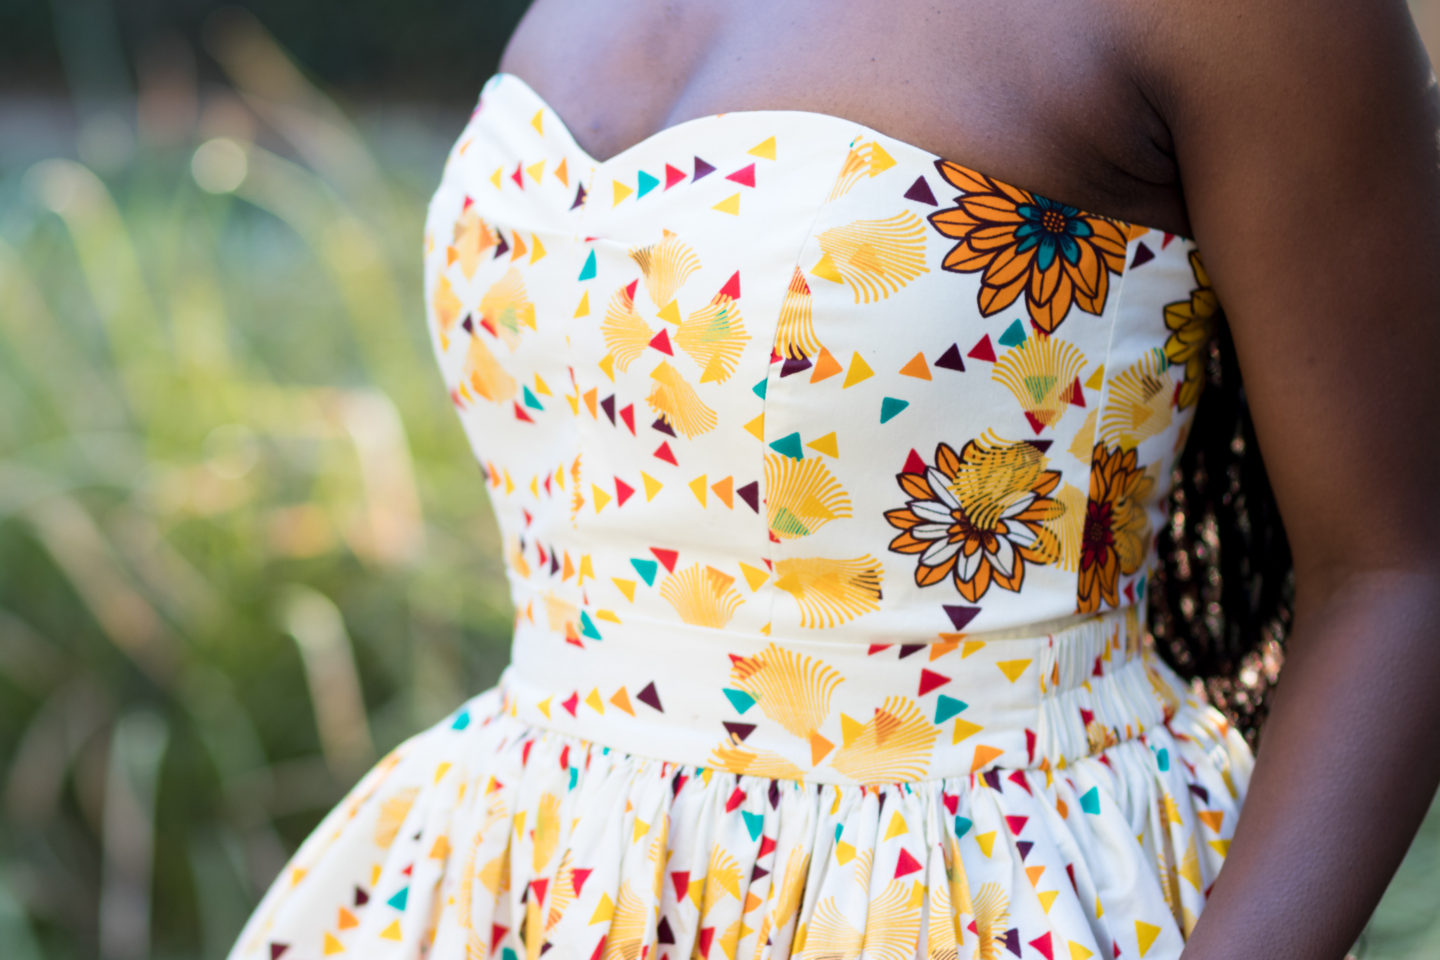 DIY Fitted Bodice and Maxi Skirt Lamour Dress + Butterick 6453 Ankara African Print Floral flowers spring fashion